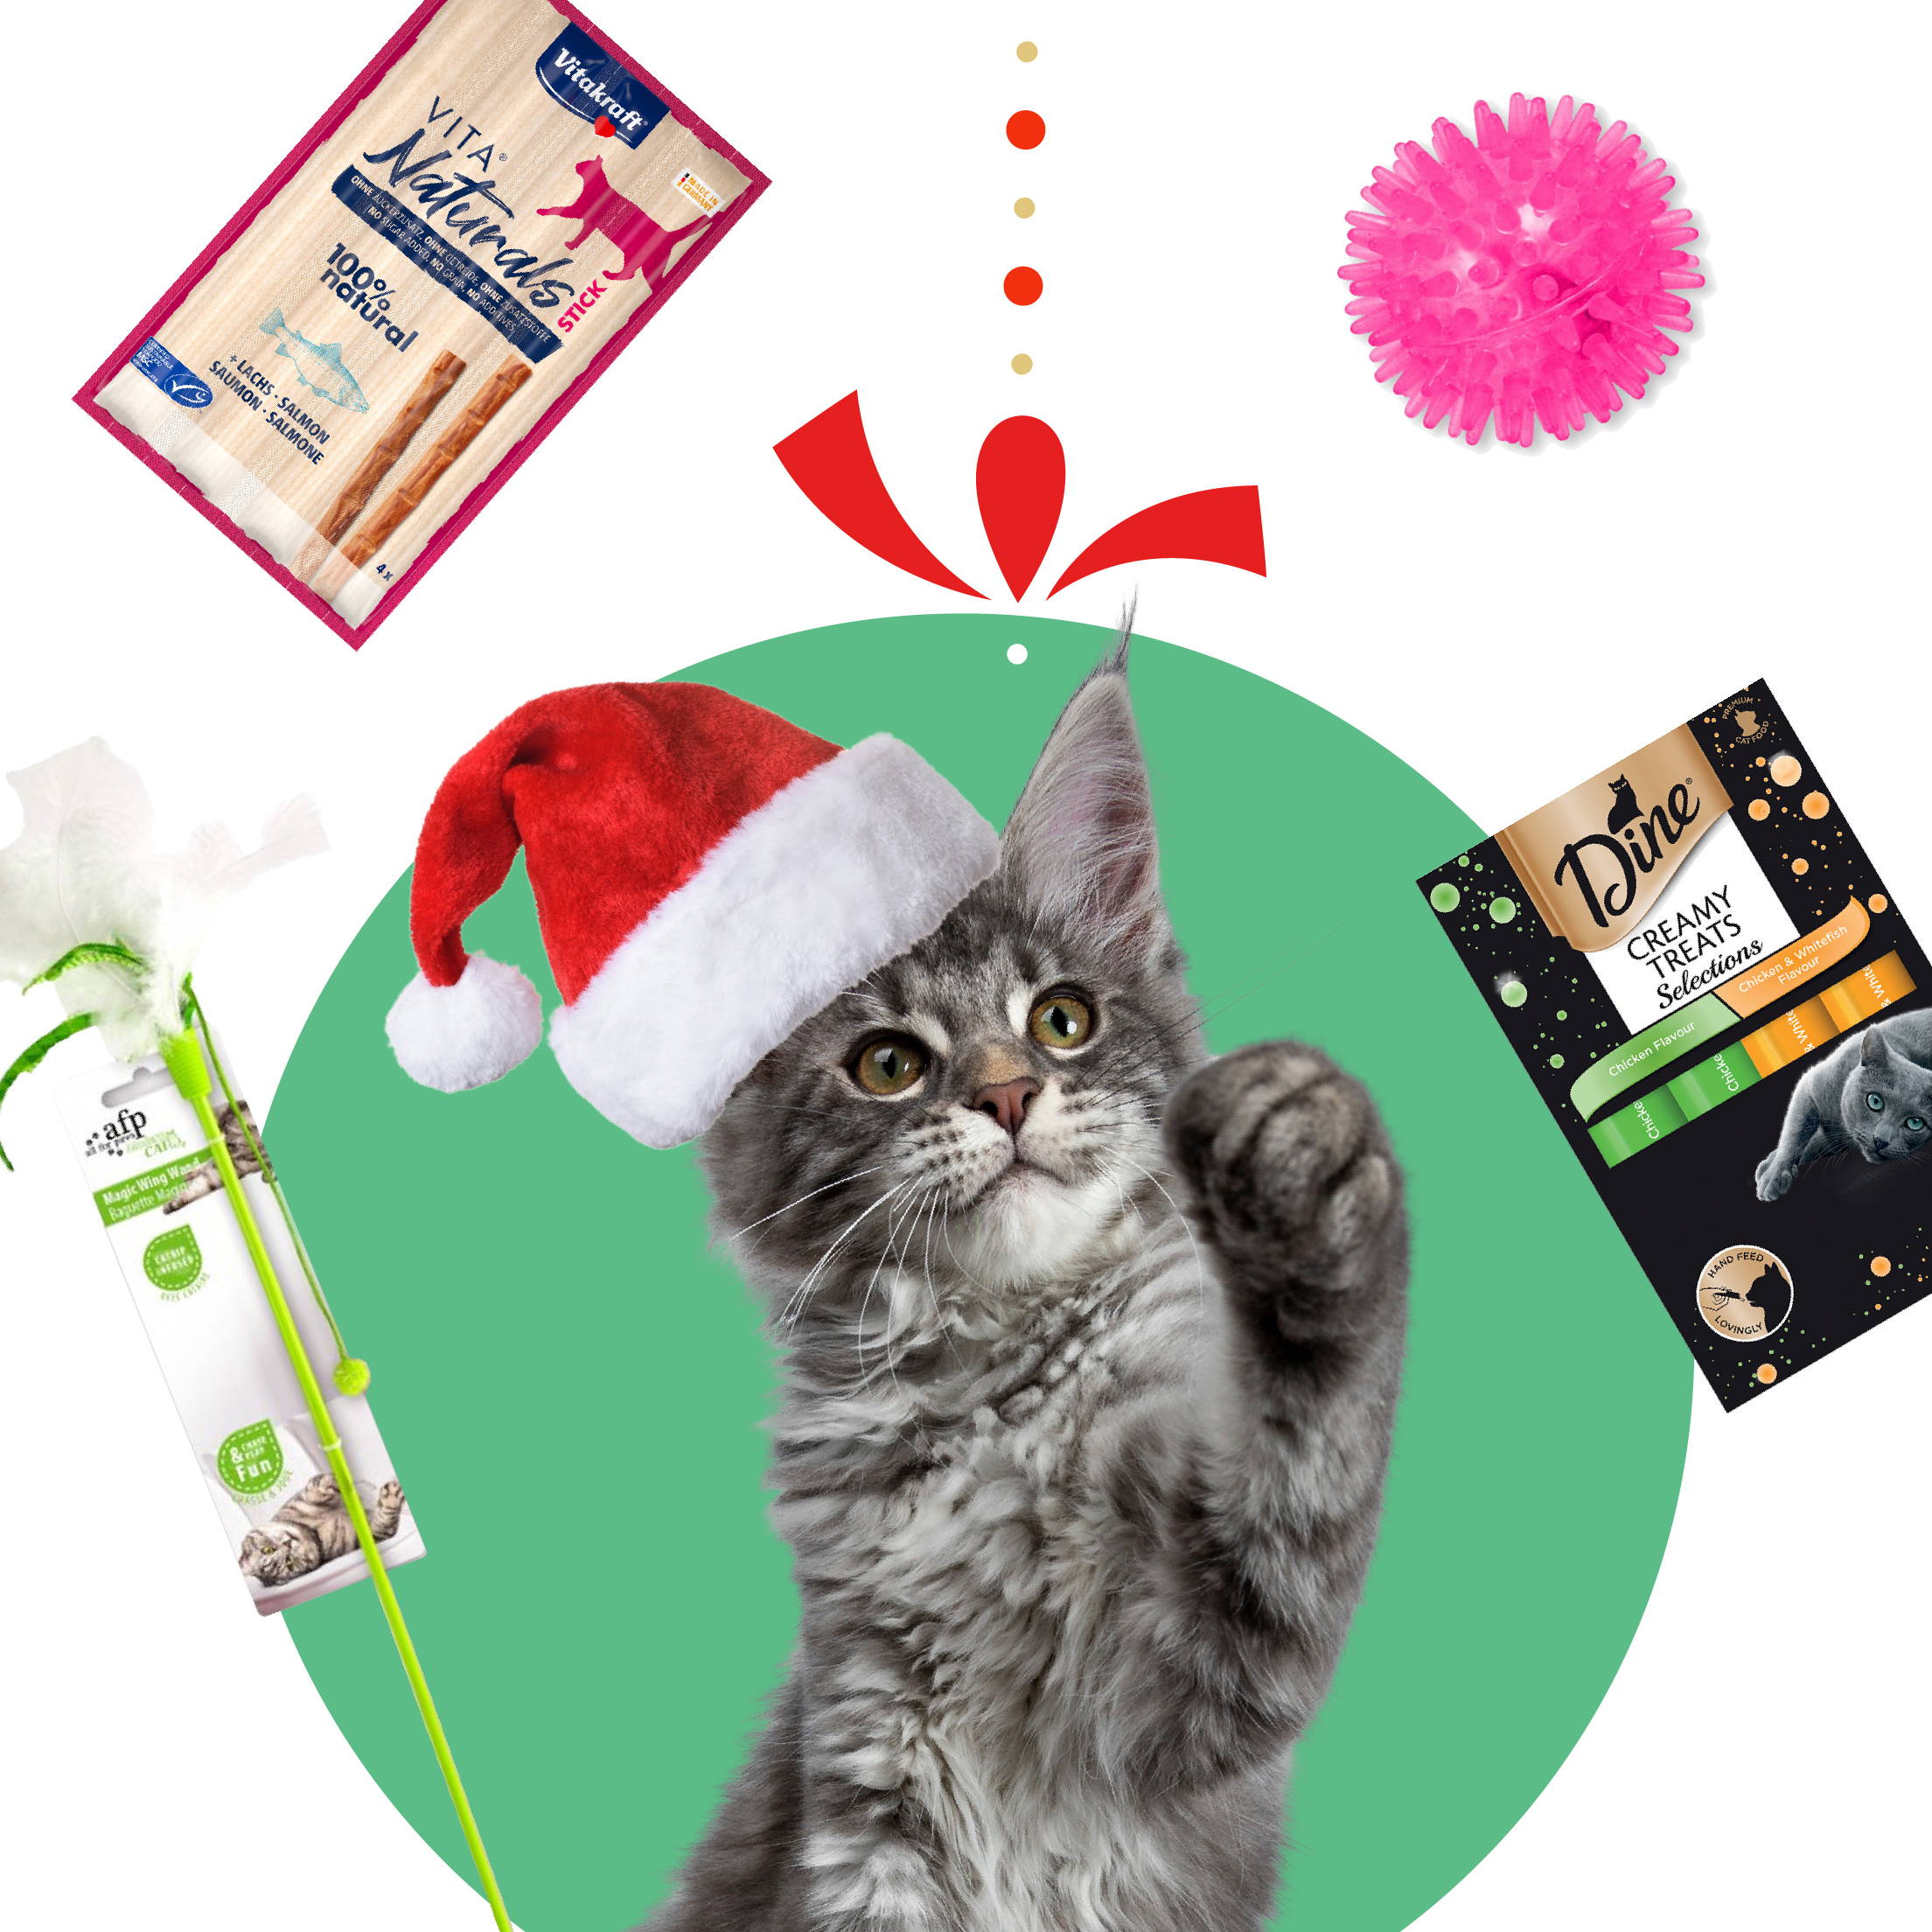 Stocking Stuffers for Cats